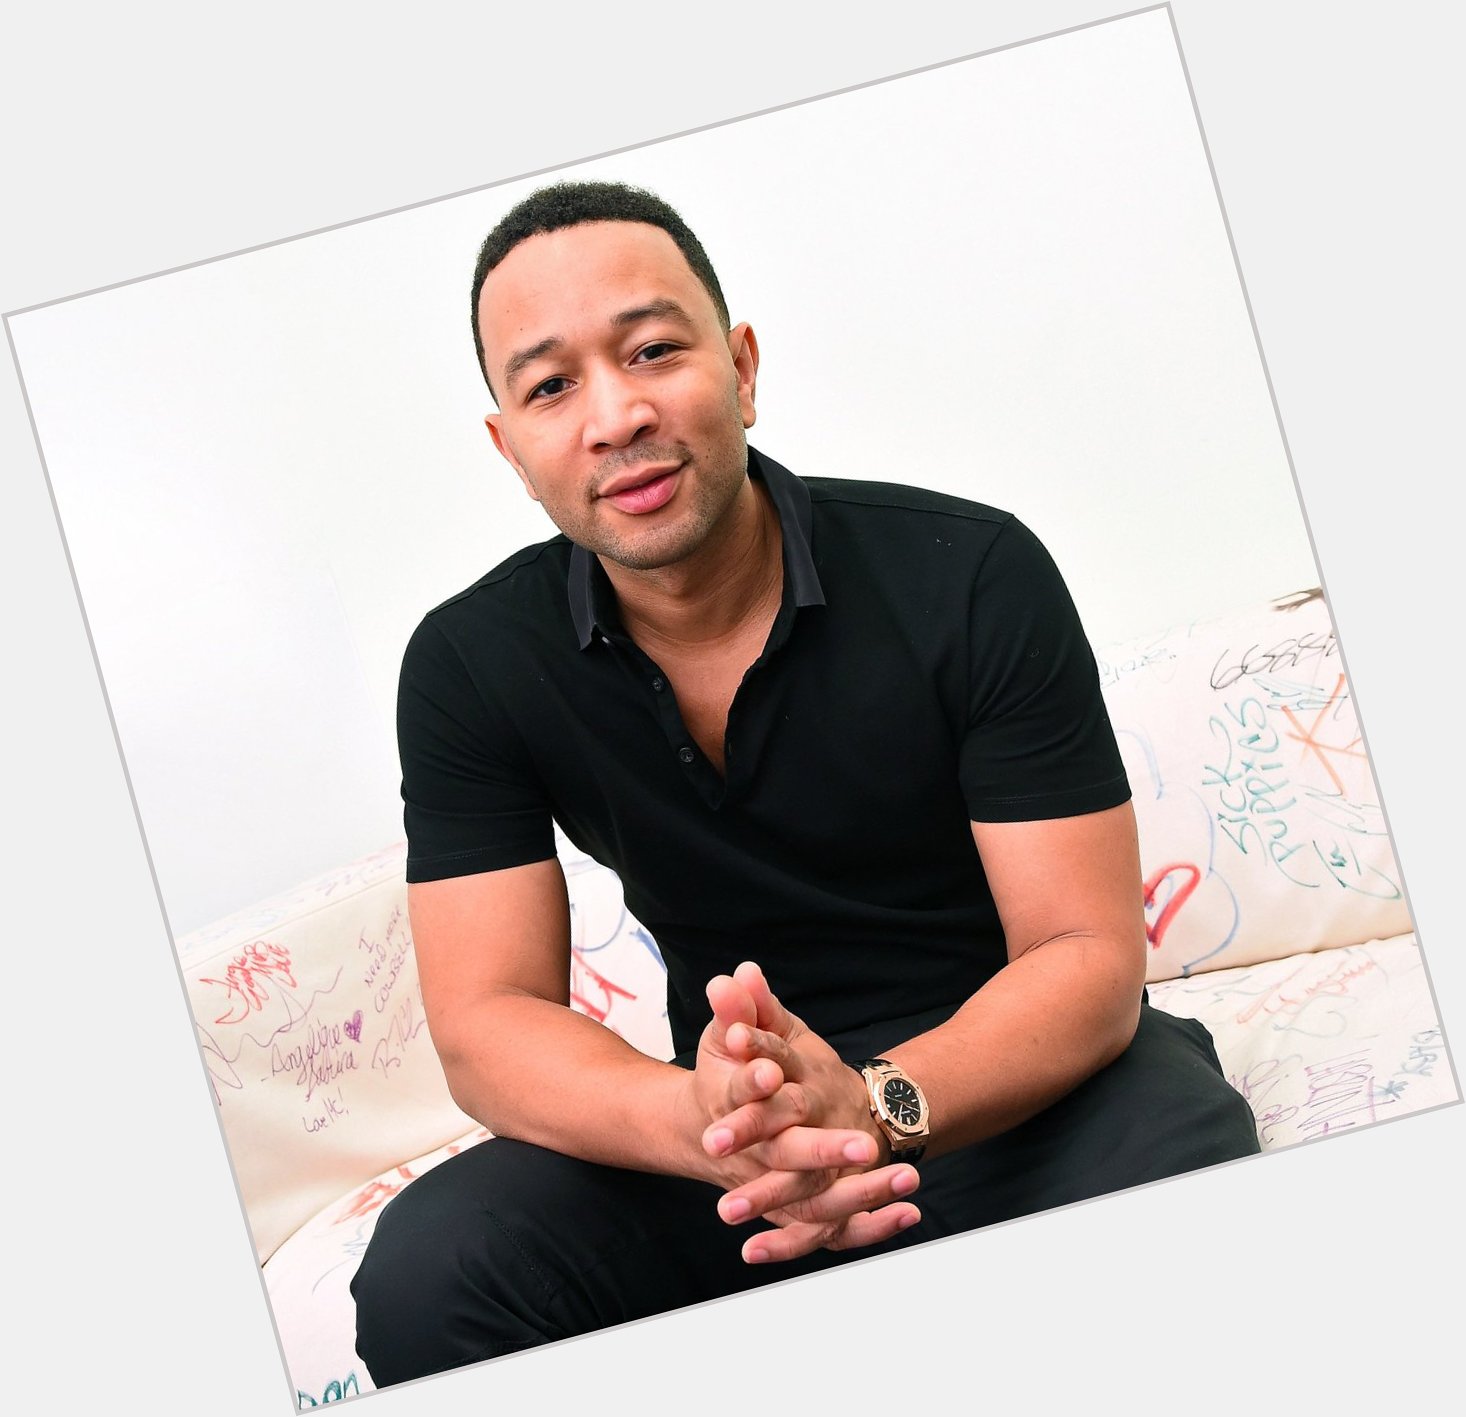 BORN ON THIS DAY
John Legend - American singer, songwriter, musician and actor. Happy 39th Birthday, John!  